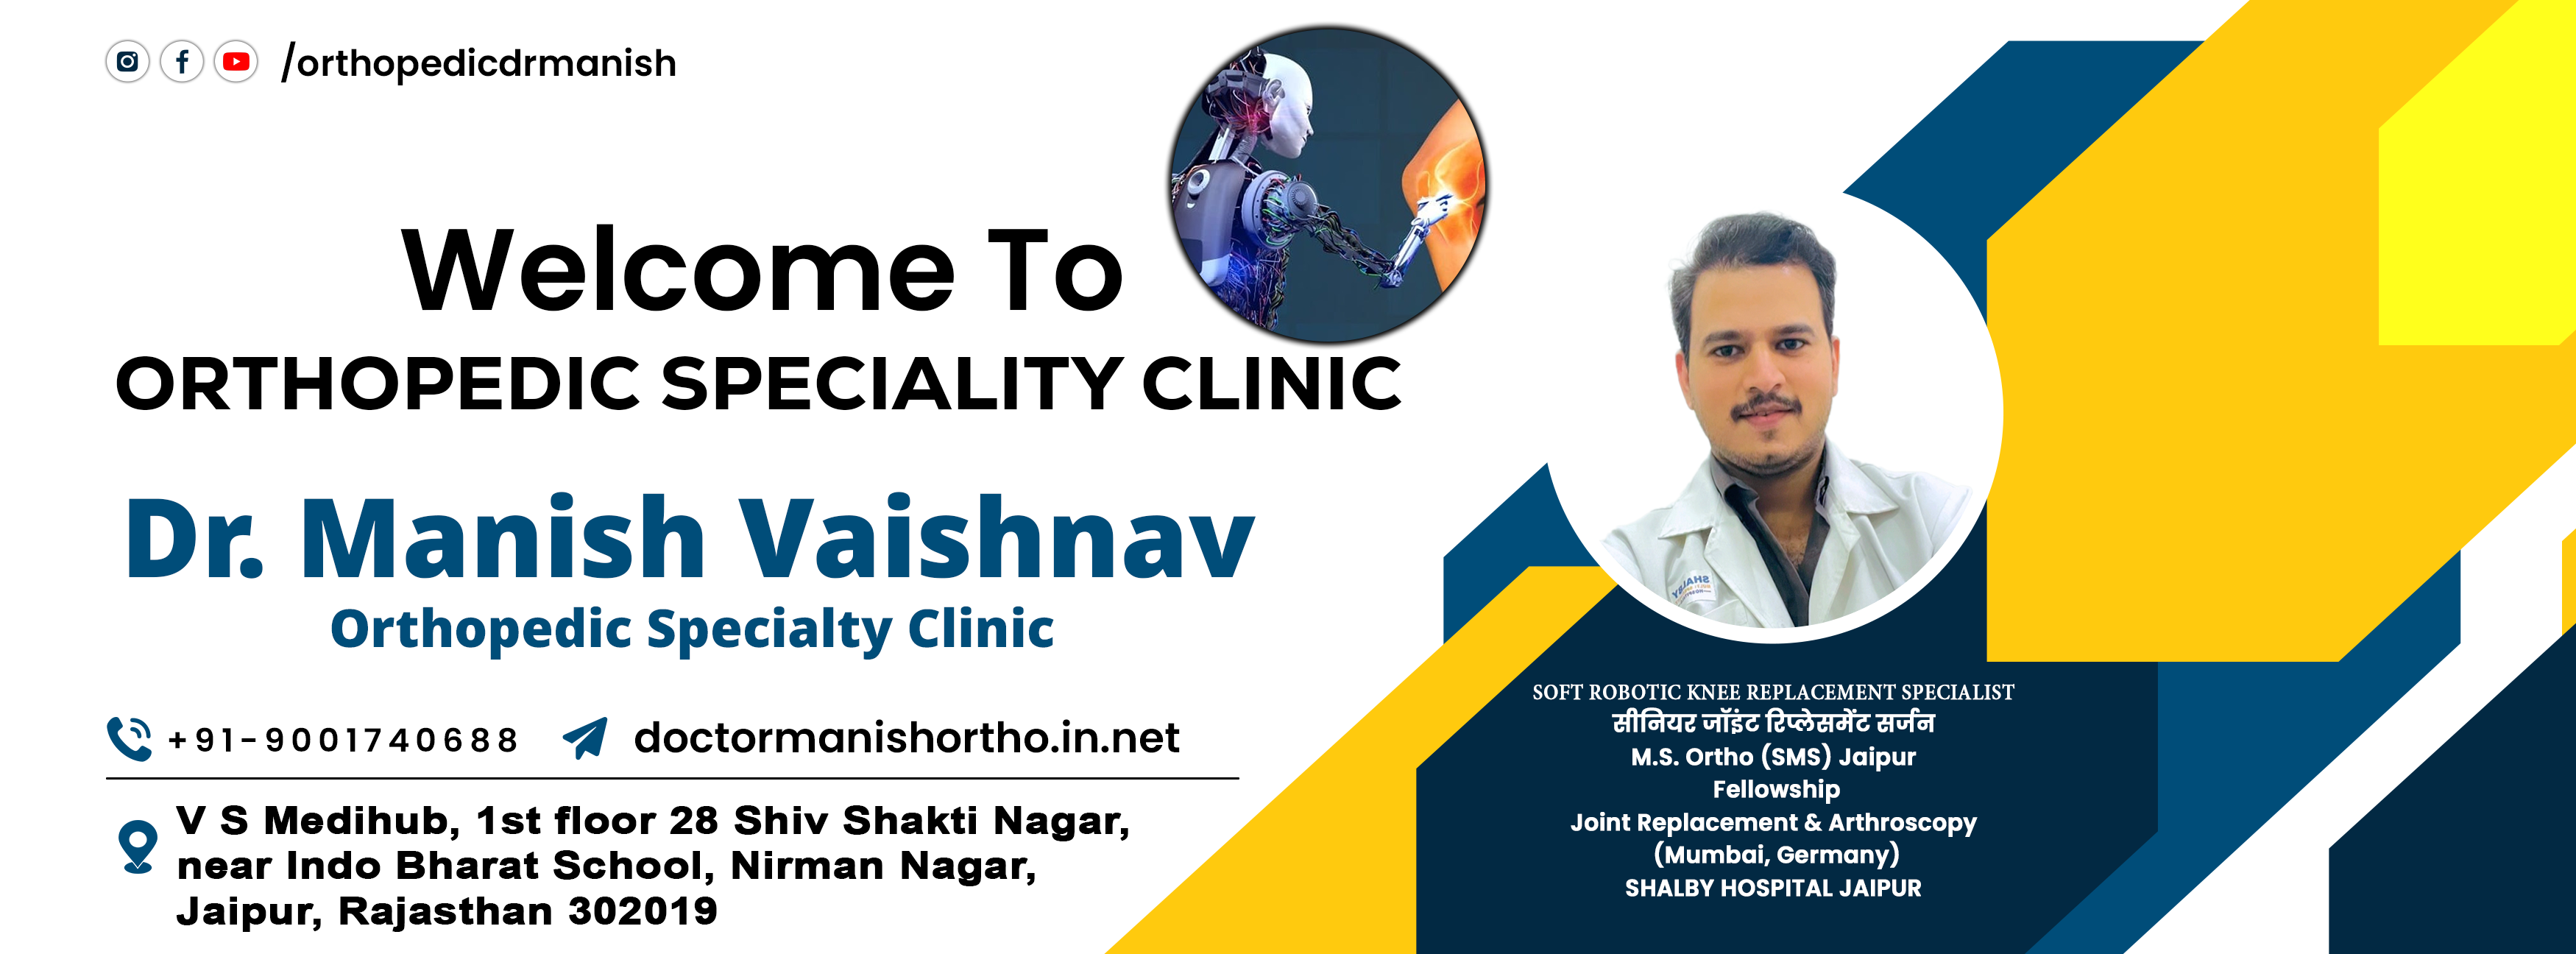 Dr Manish Vaishnav- Ligament Surgeon in Jaipur, ACL Doctor|Clinics|Medical Services